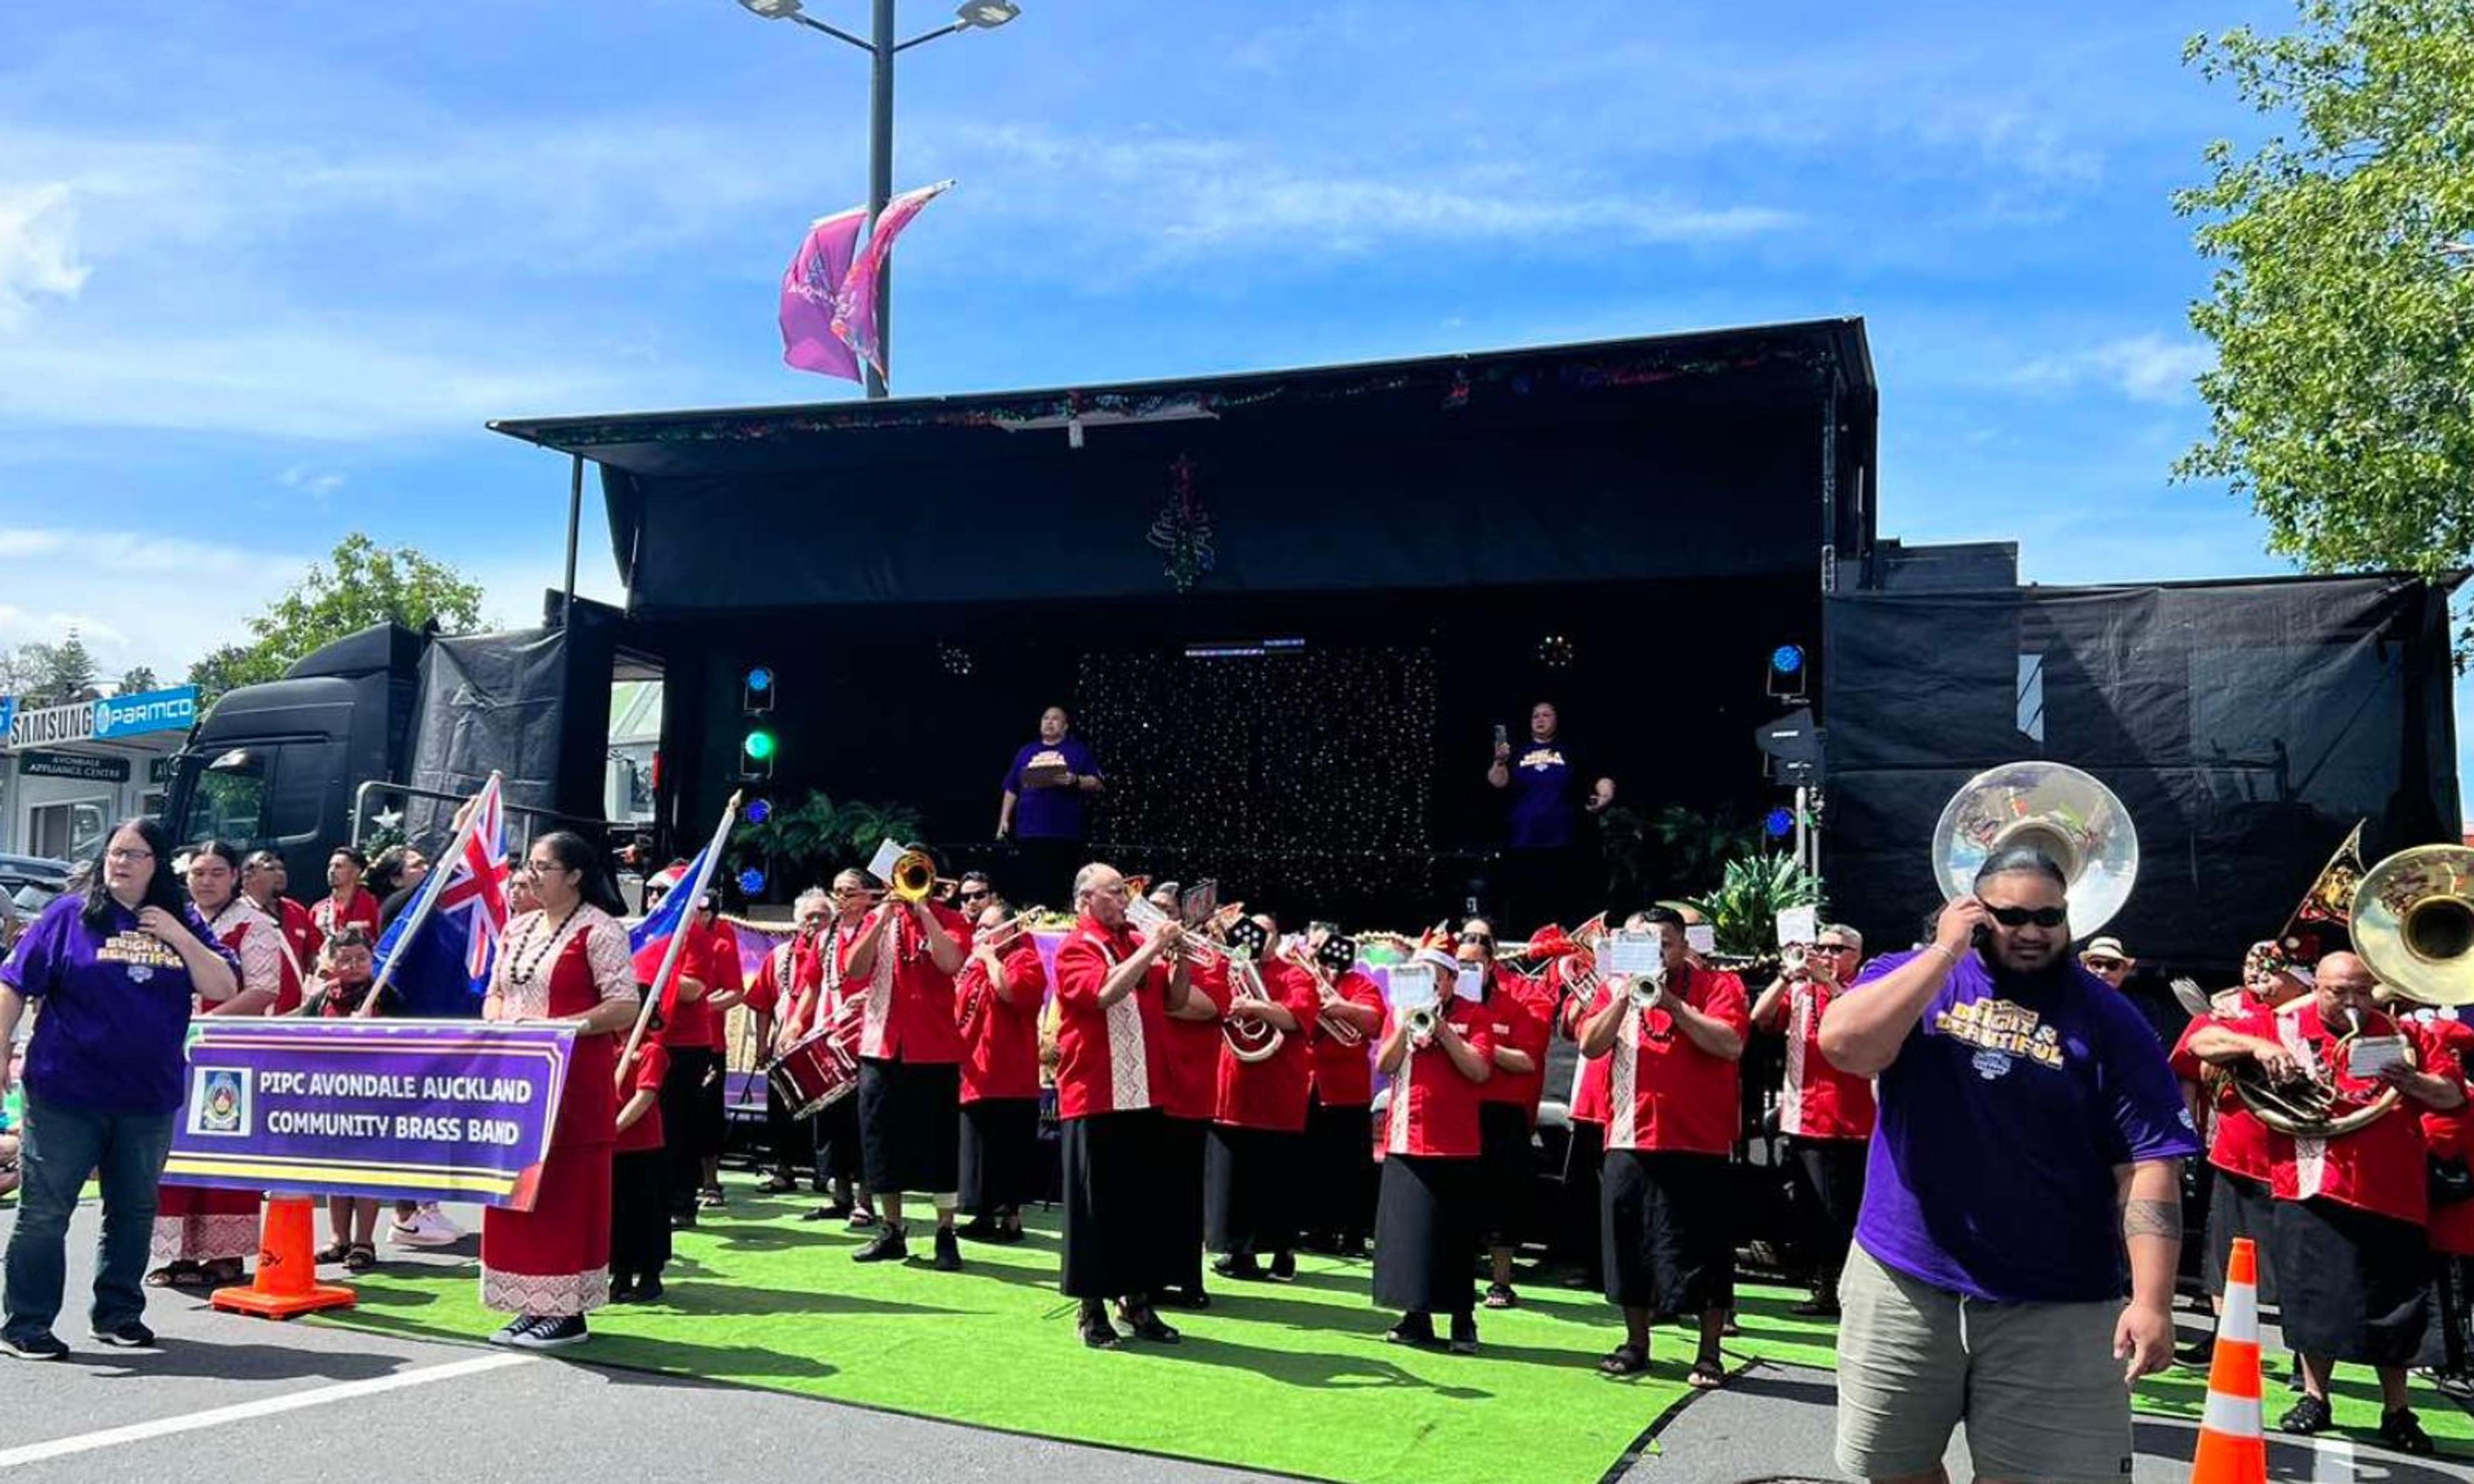 The PIPC Avondale Auckland Community Brass Band performing at the Avondale Christmas Parade. 